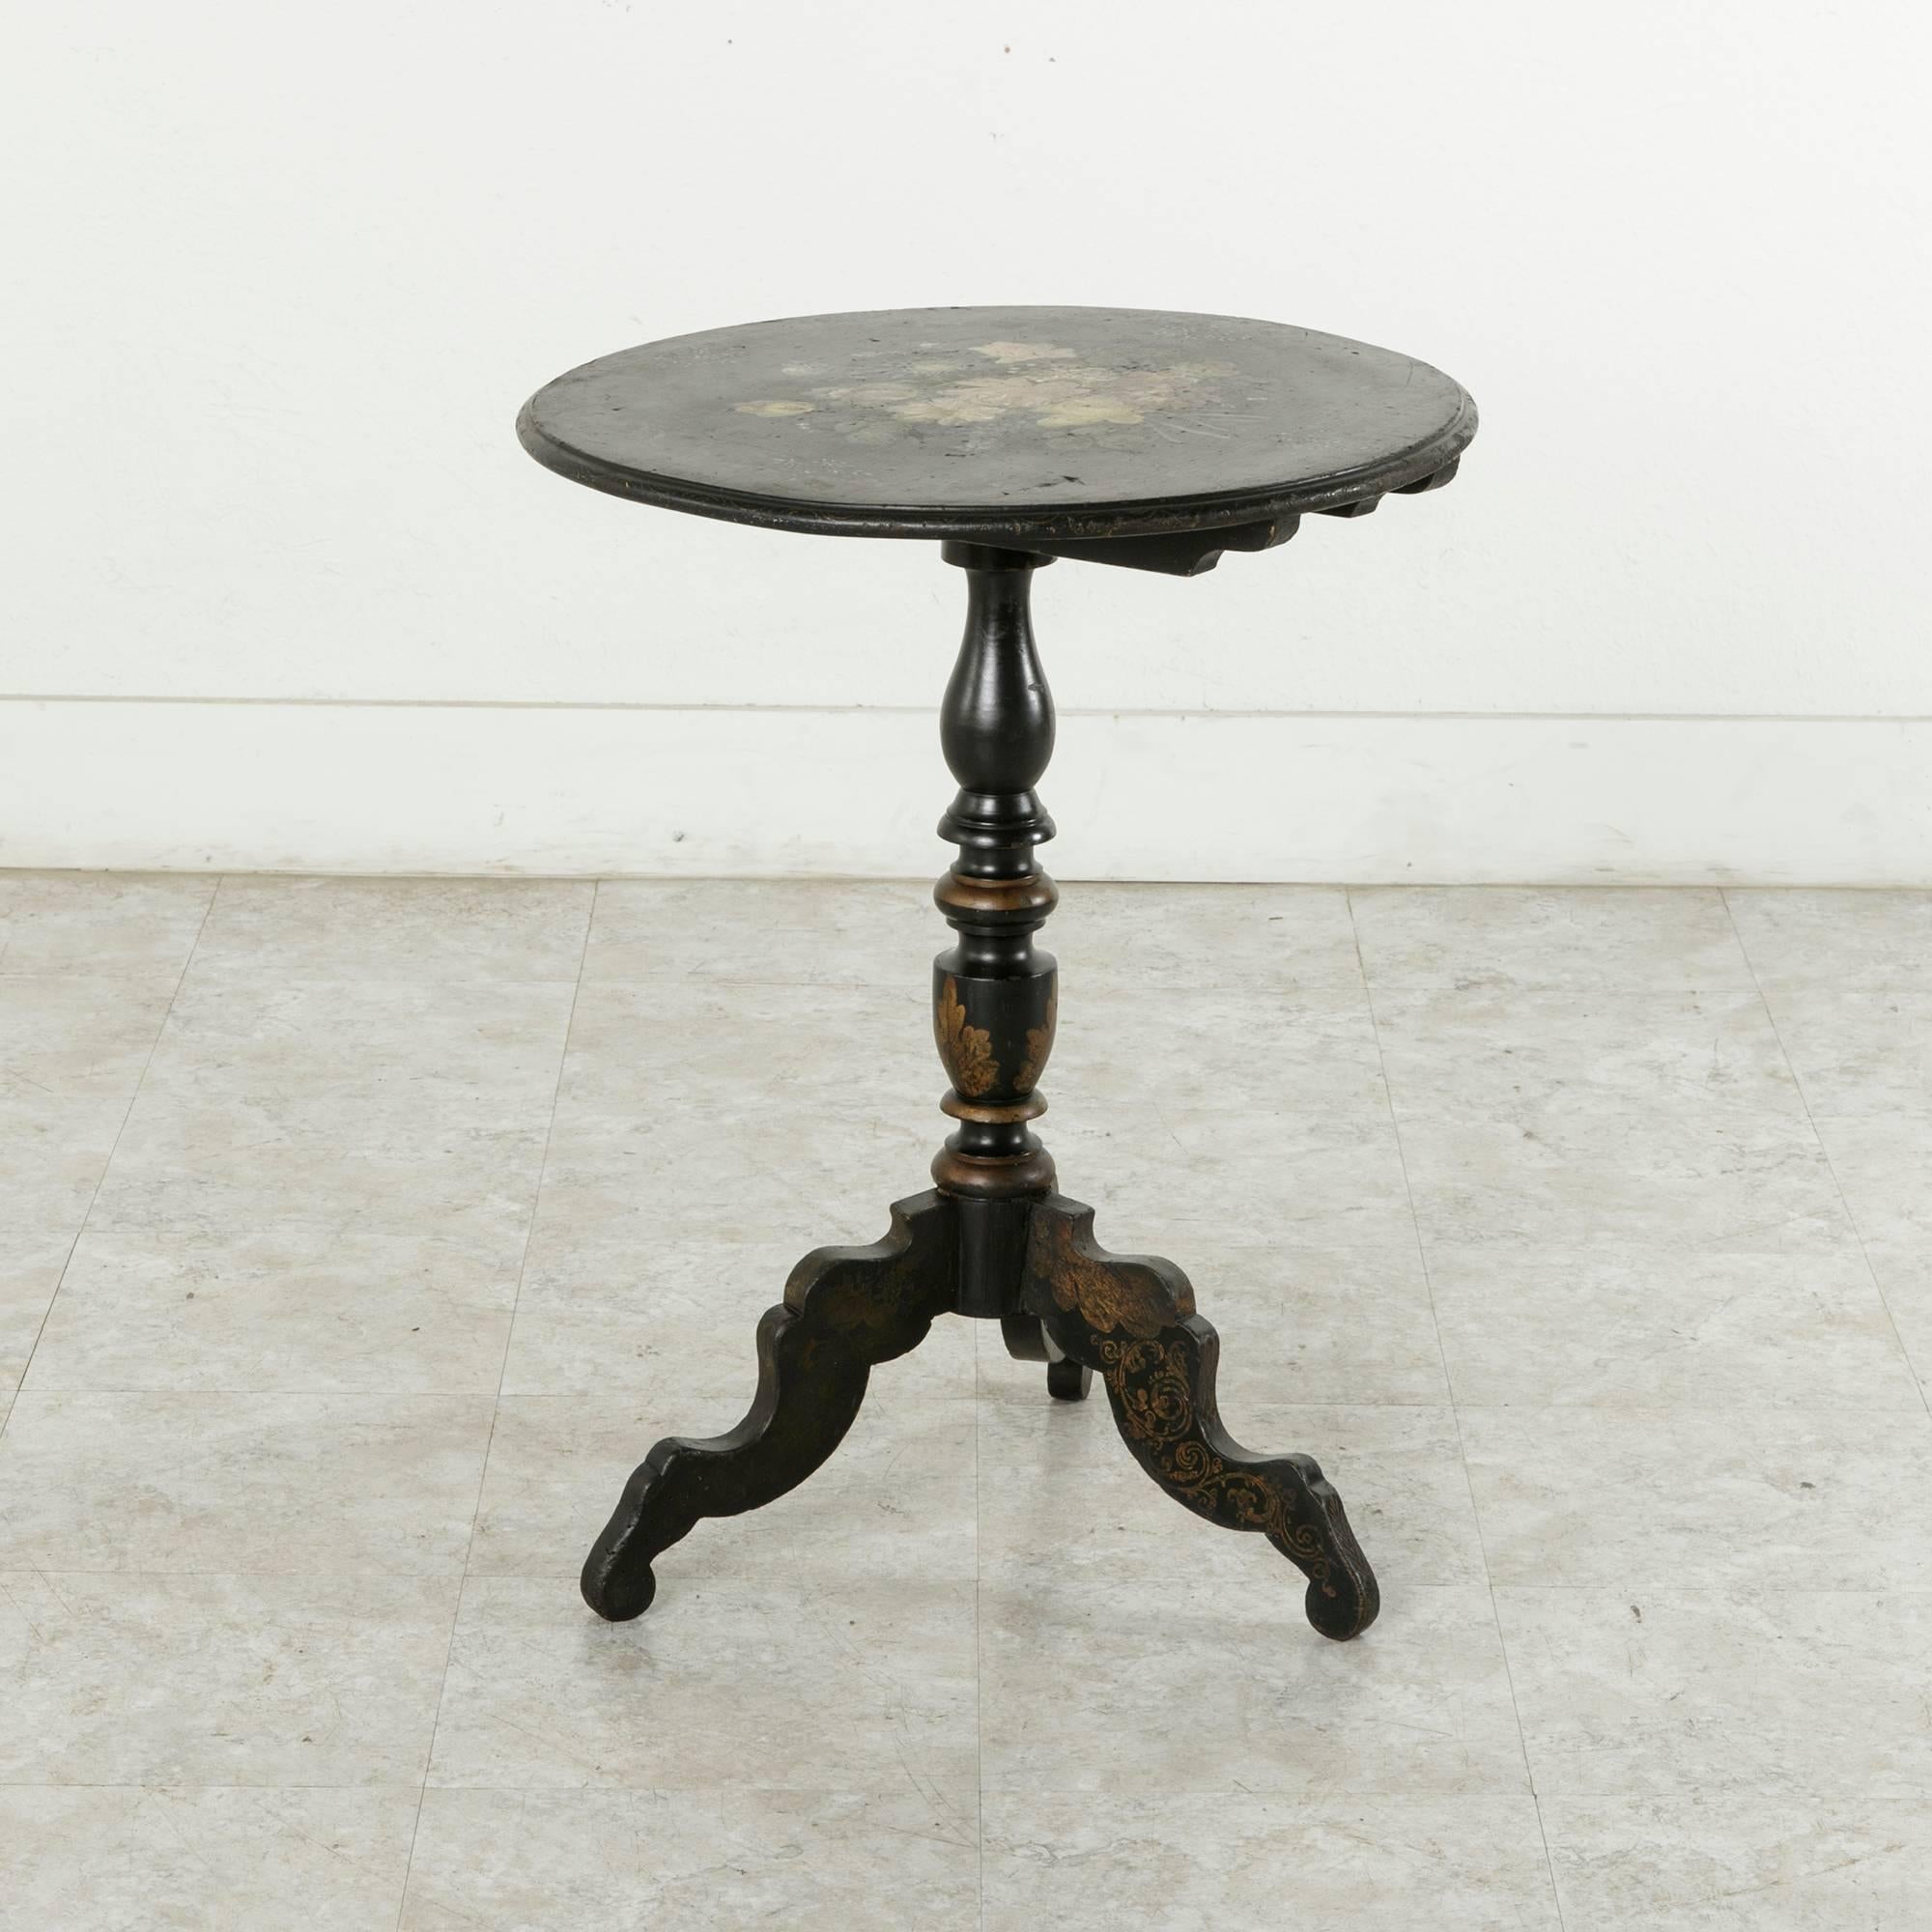 19th Century Rare Napoleon III Period Hand-Painted Floral and Ebonized Side Table